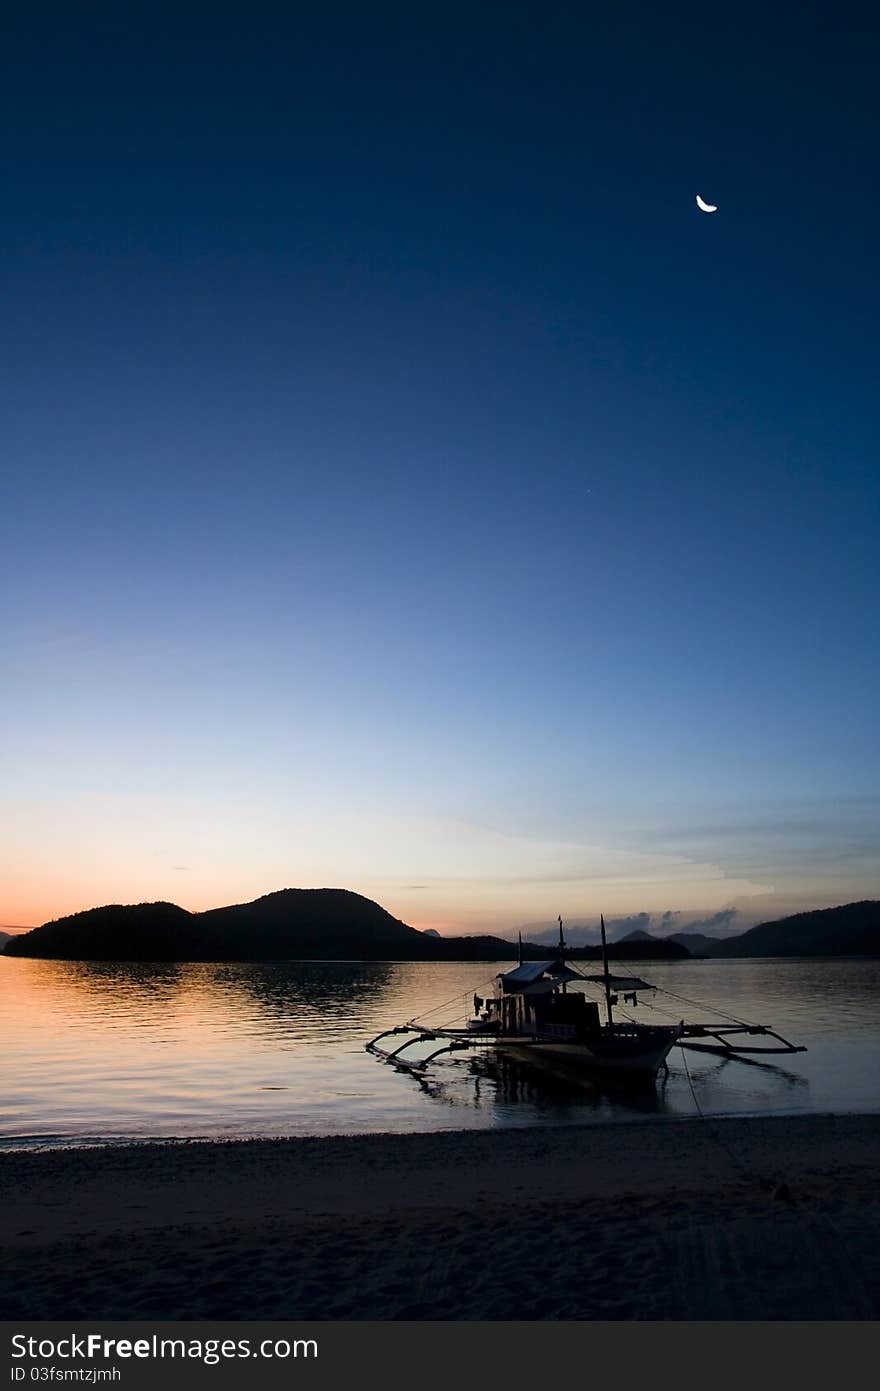 Sunrise on a desert island in the Philippines, Palawan archipelago. Sunrise on a desert island in the Philippines, Palawan archipelago